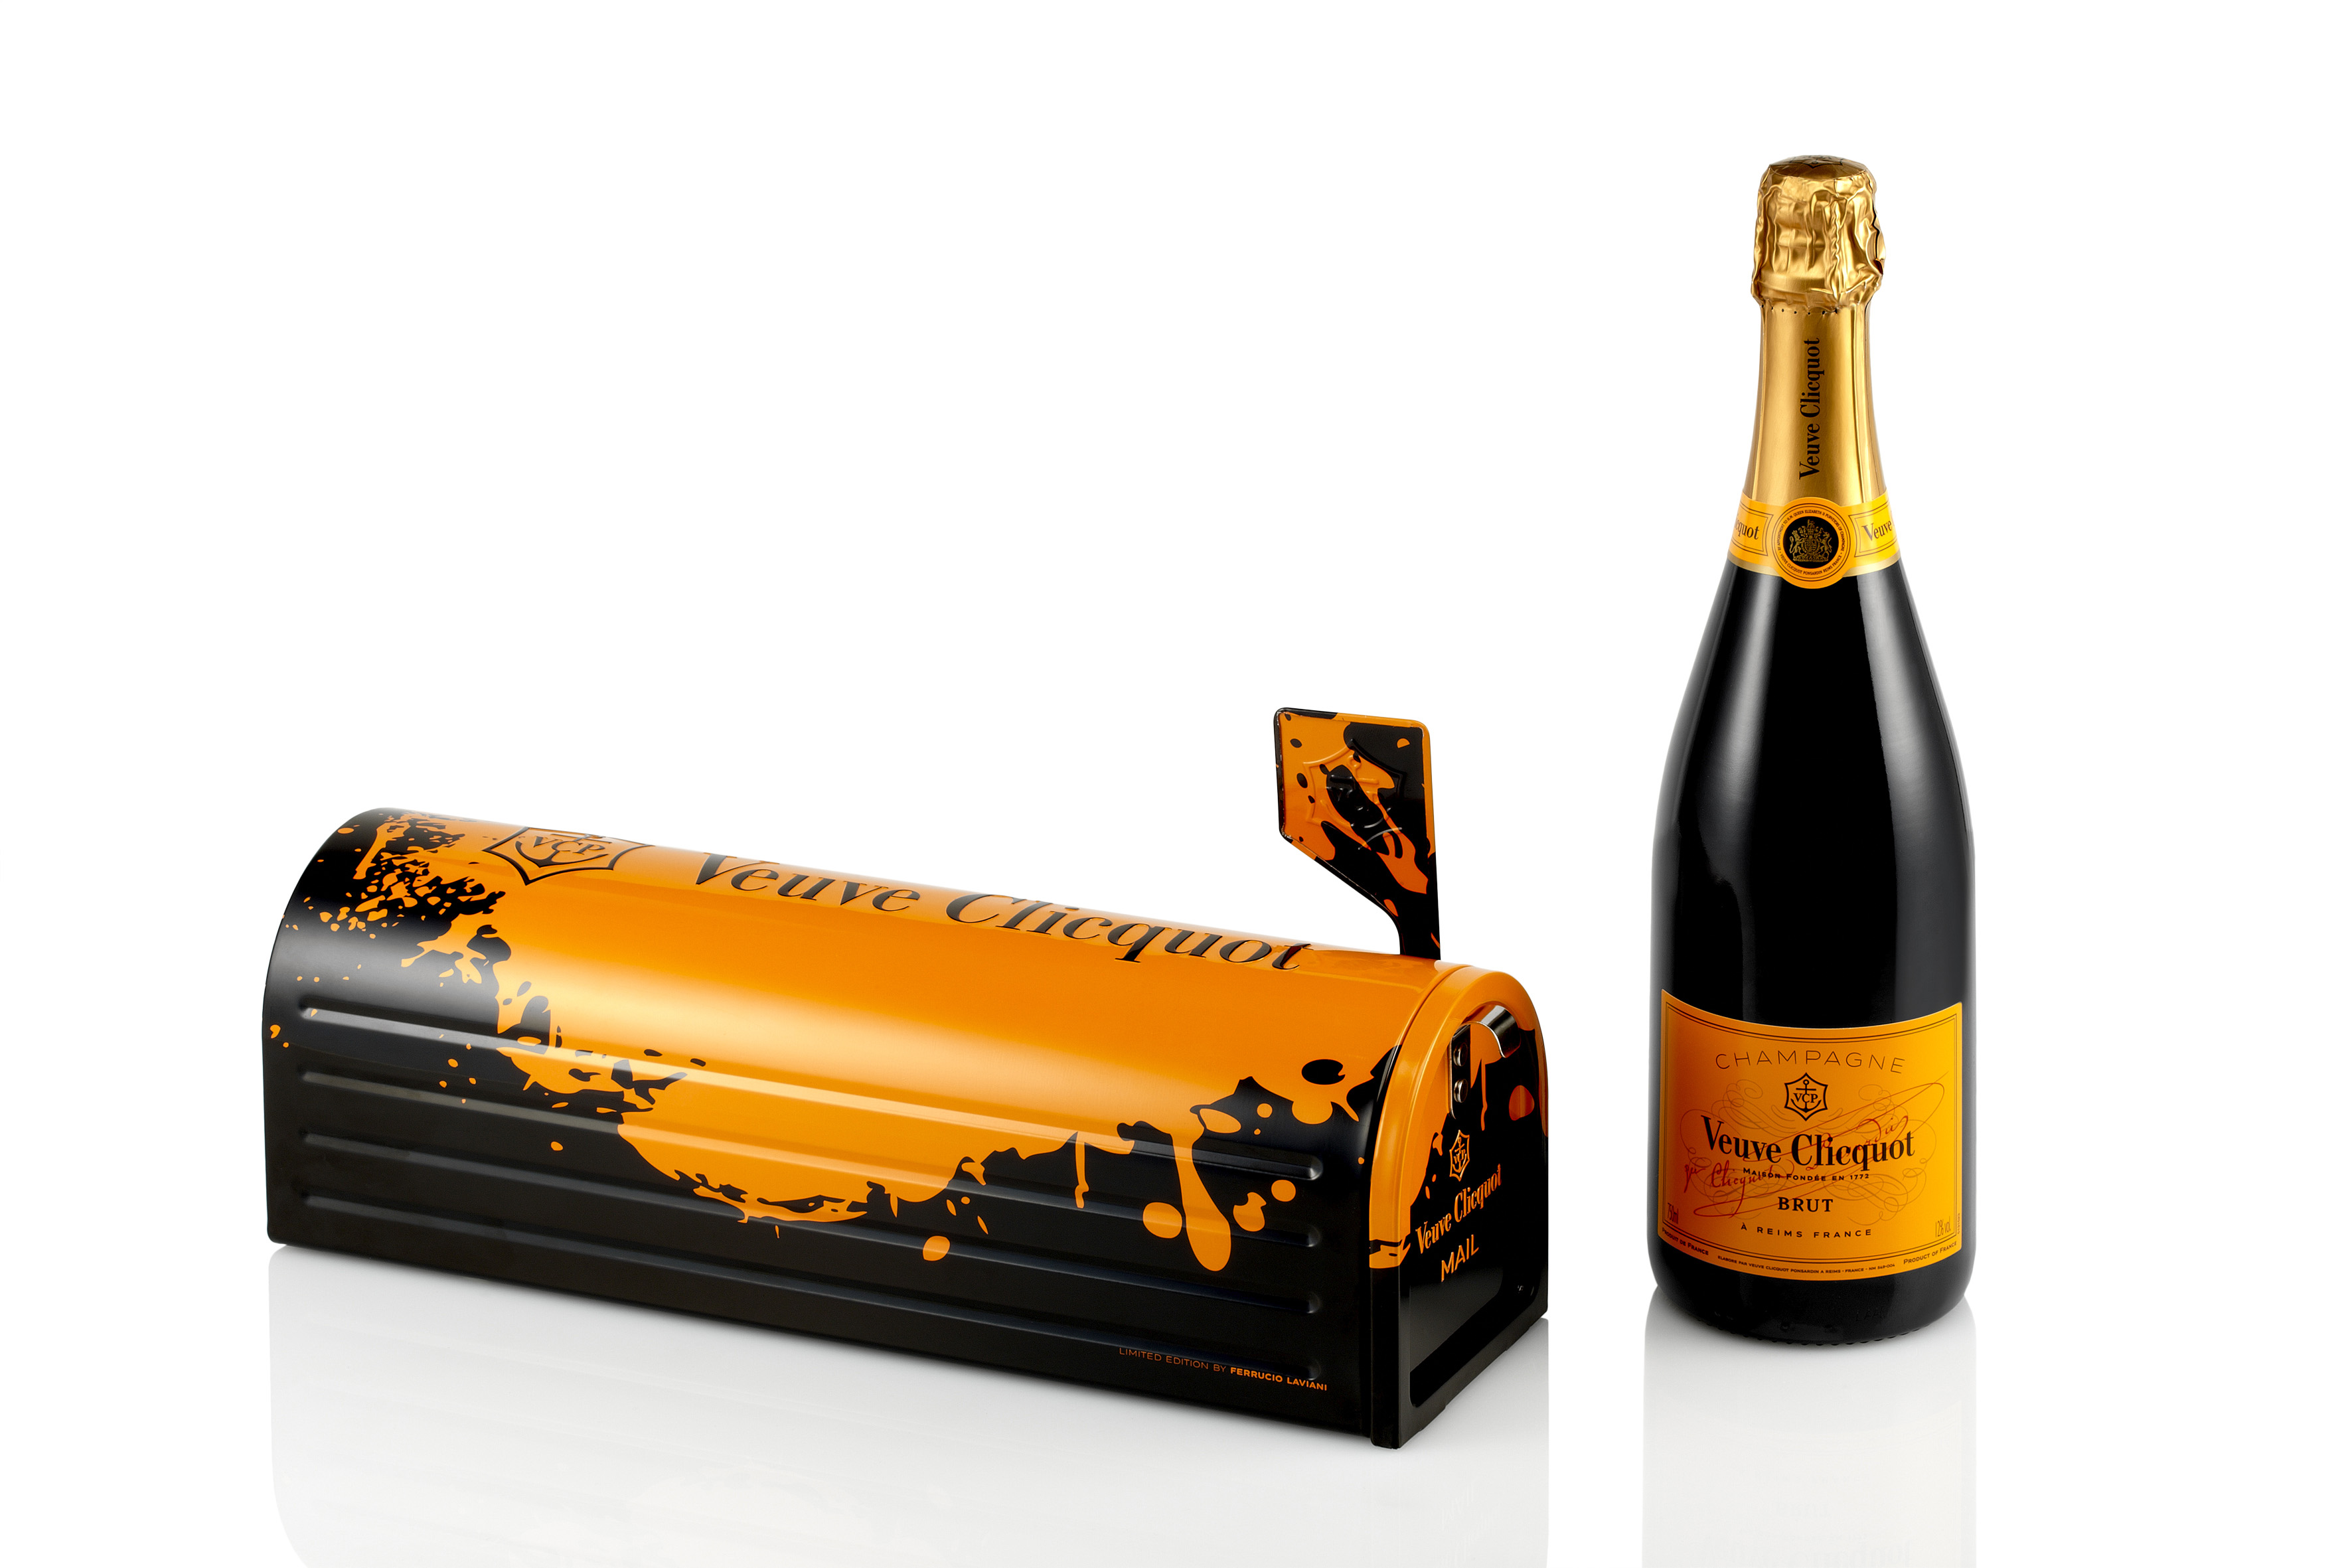 VEUVE CLICQUOT LAUNCHES ITS FIRST GLOBAL DESIGN INITIATIVE TO FIND